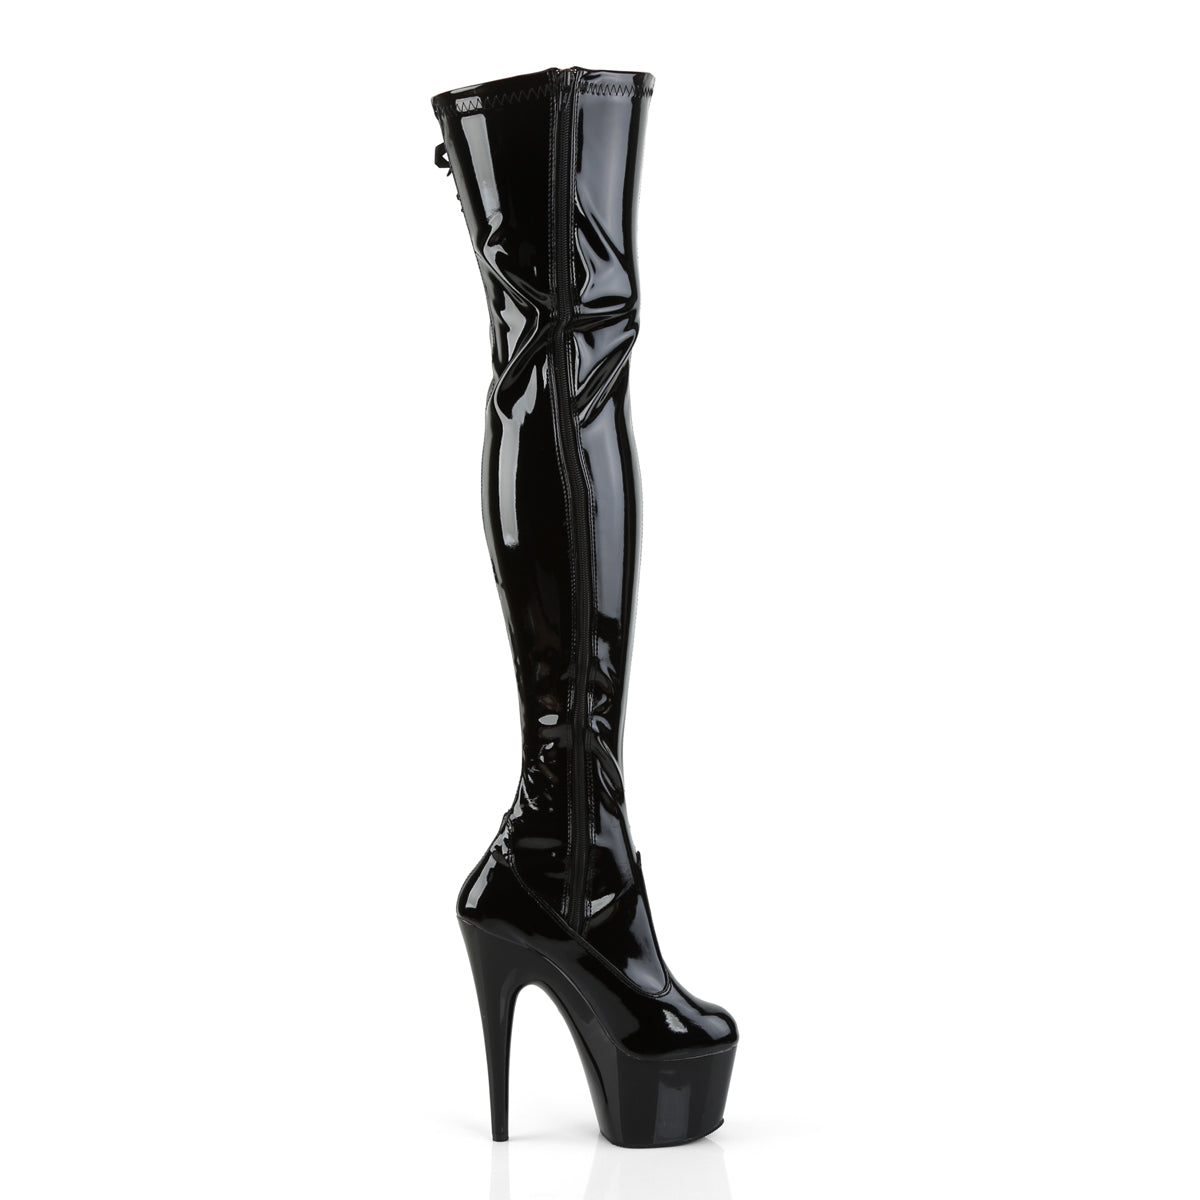 ADORE-3050 7" Black Stretch Patent Pole Dancer Kinky Boots-Pleaser- Sexy Shoes Fetish Heels